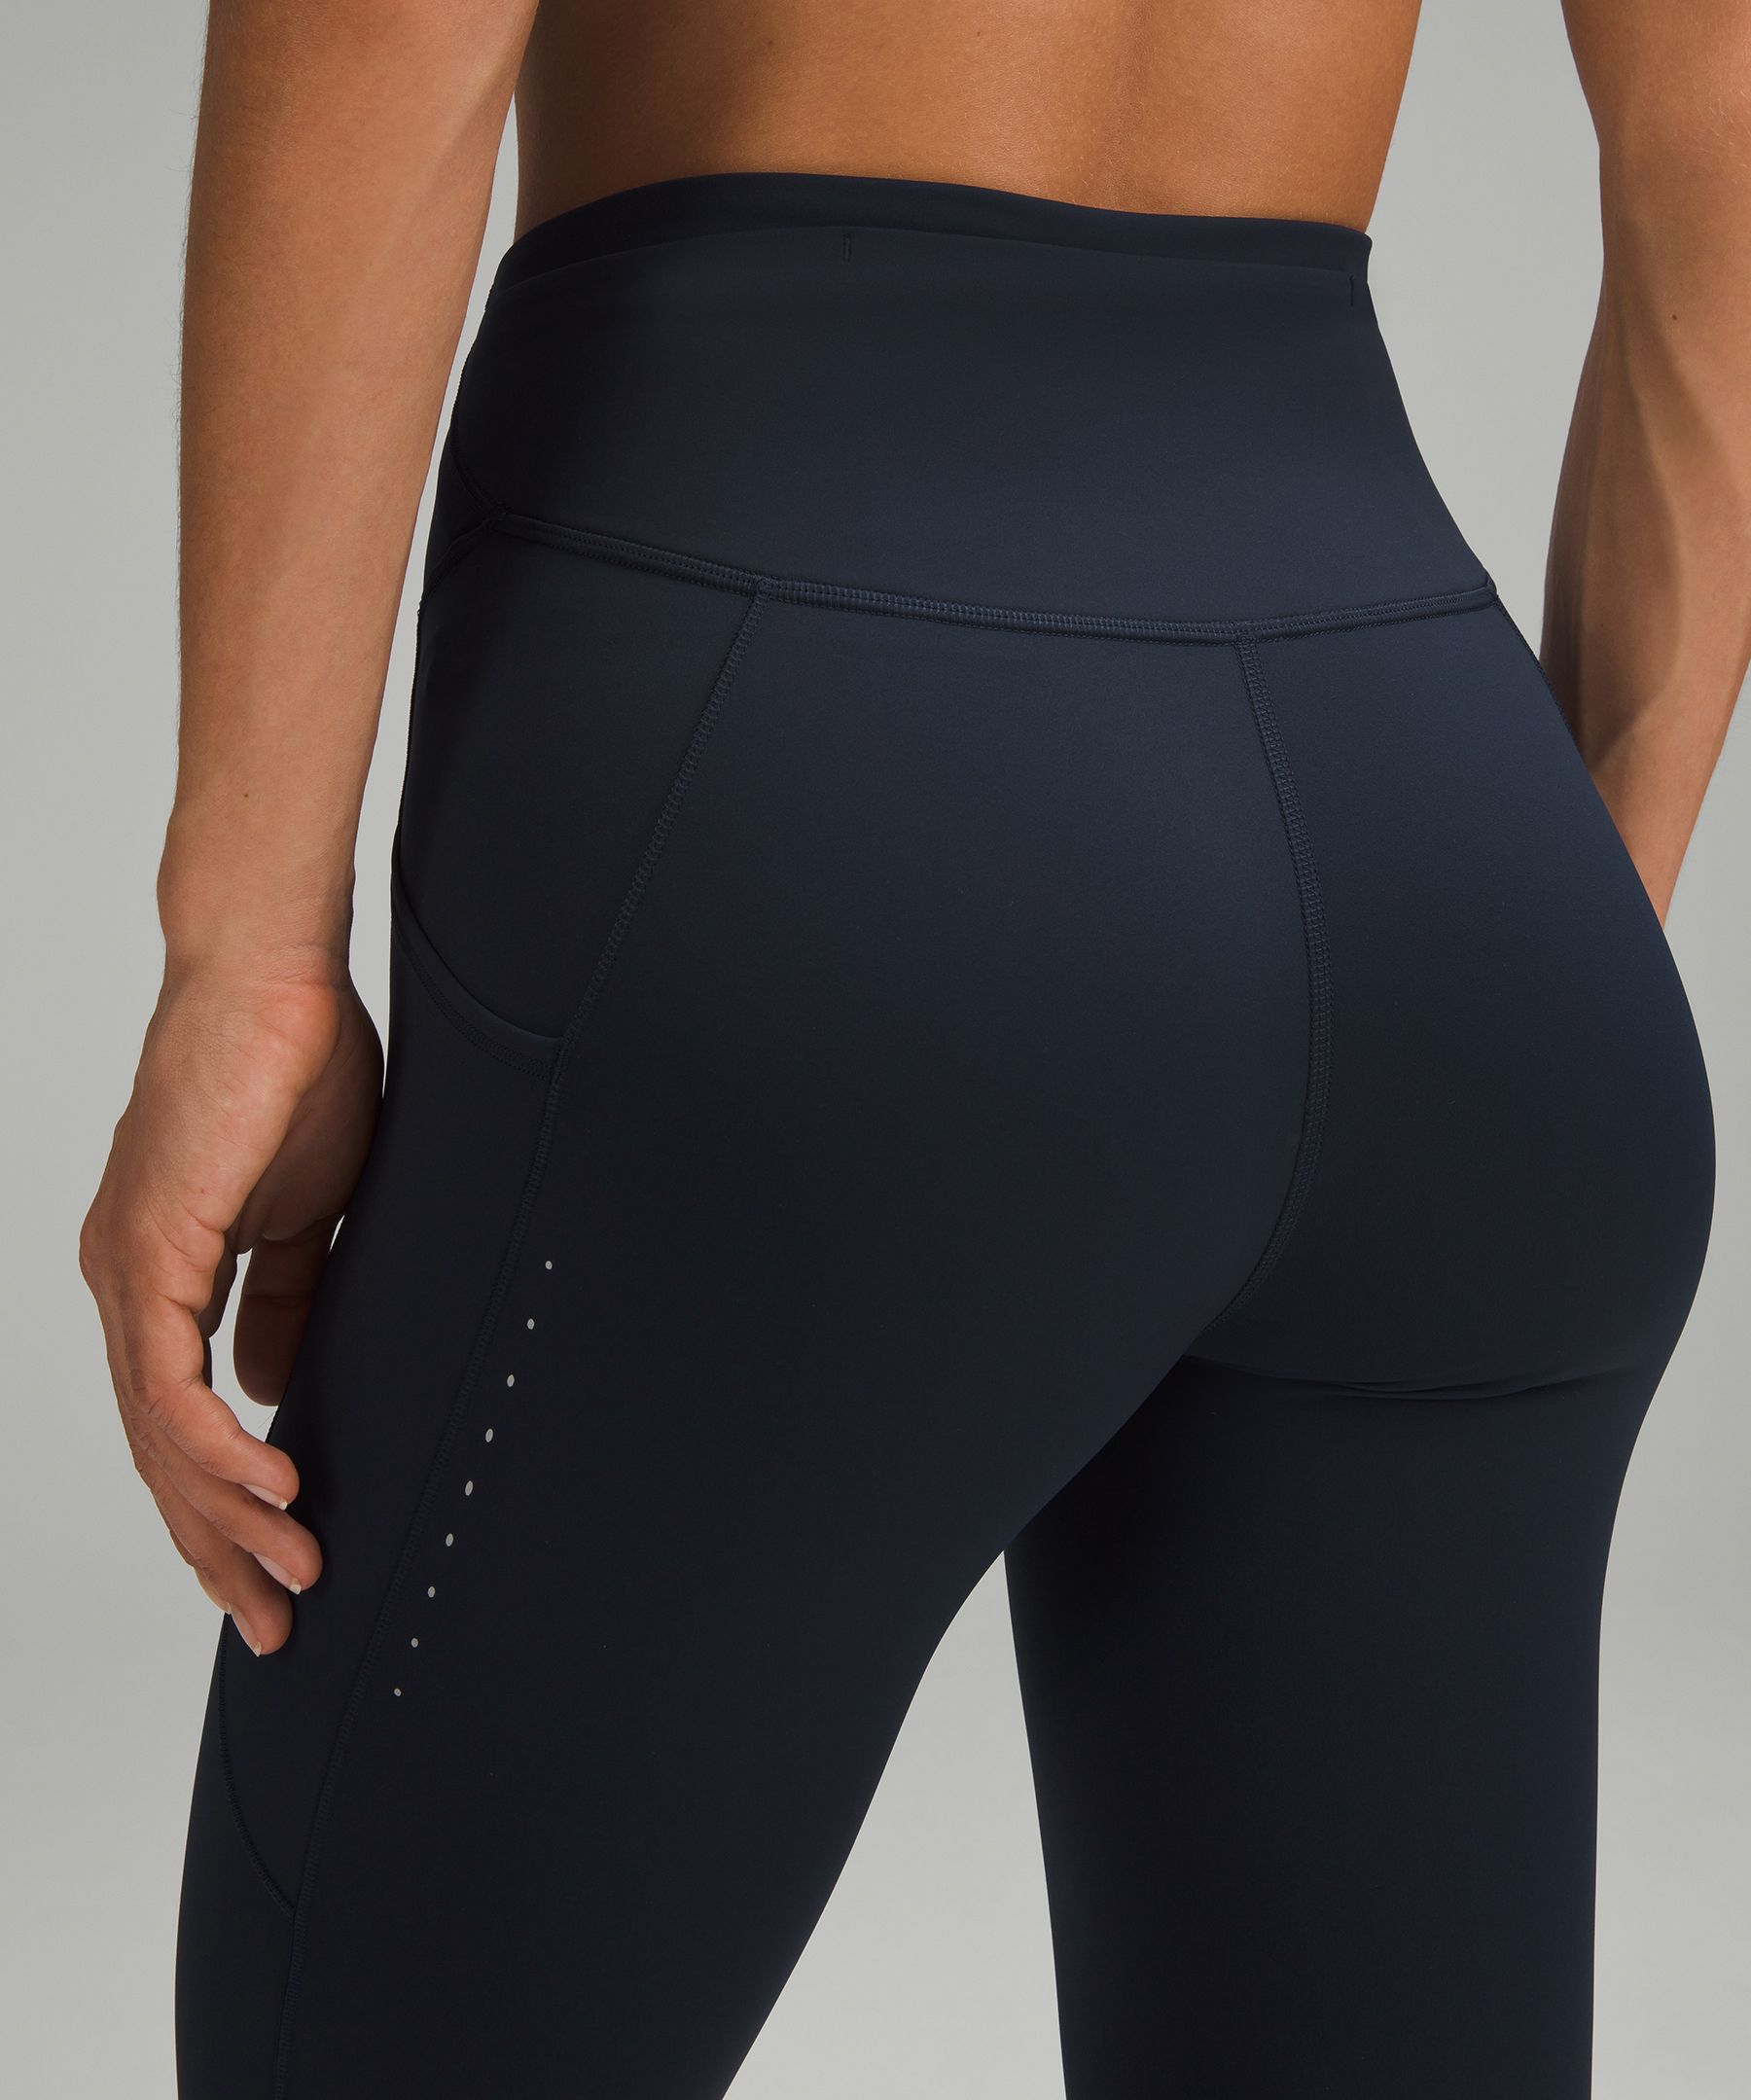 Lululemon Fast and Free High-Rise Tight 28 *Non-Reflective Suede